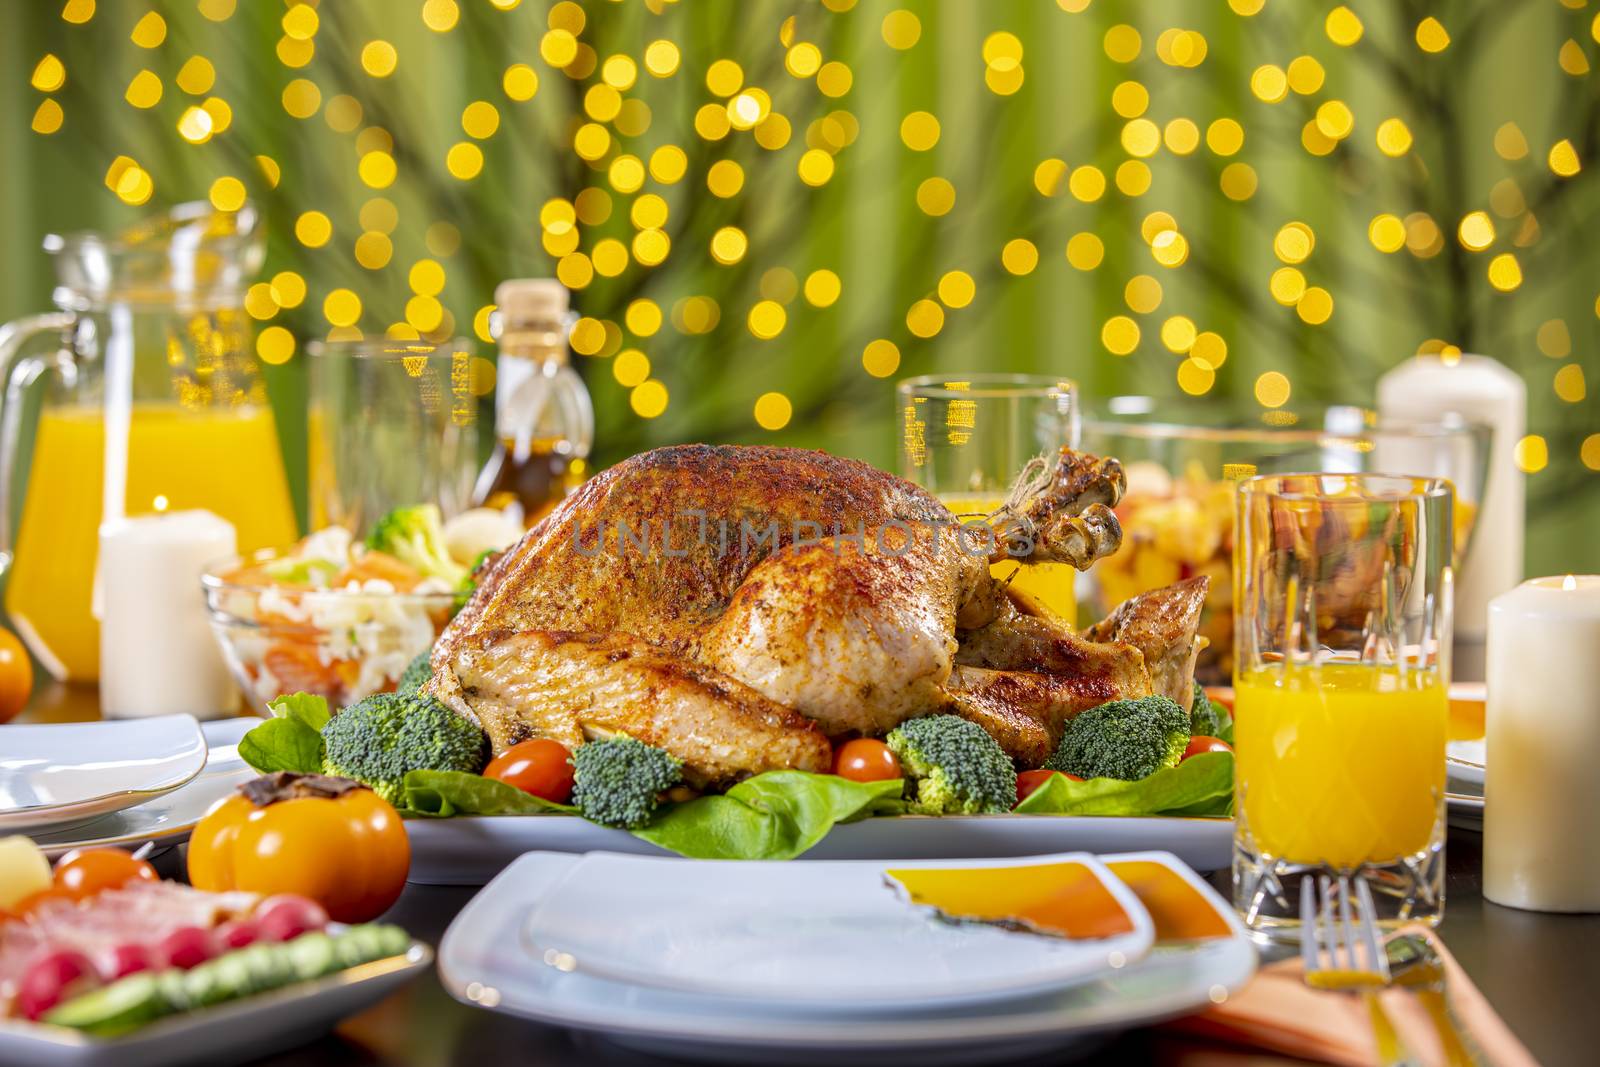 Roasted turkey on festive table for Thanksgiving celebration by manaemedia